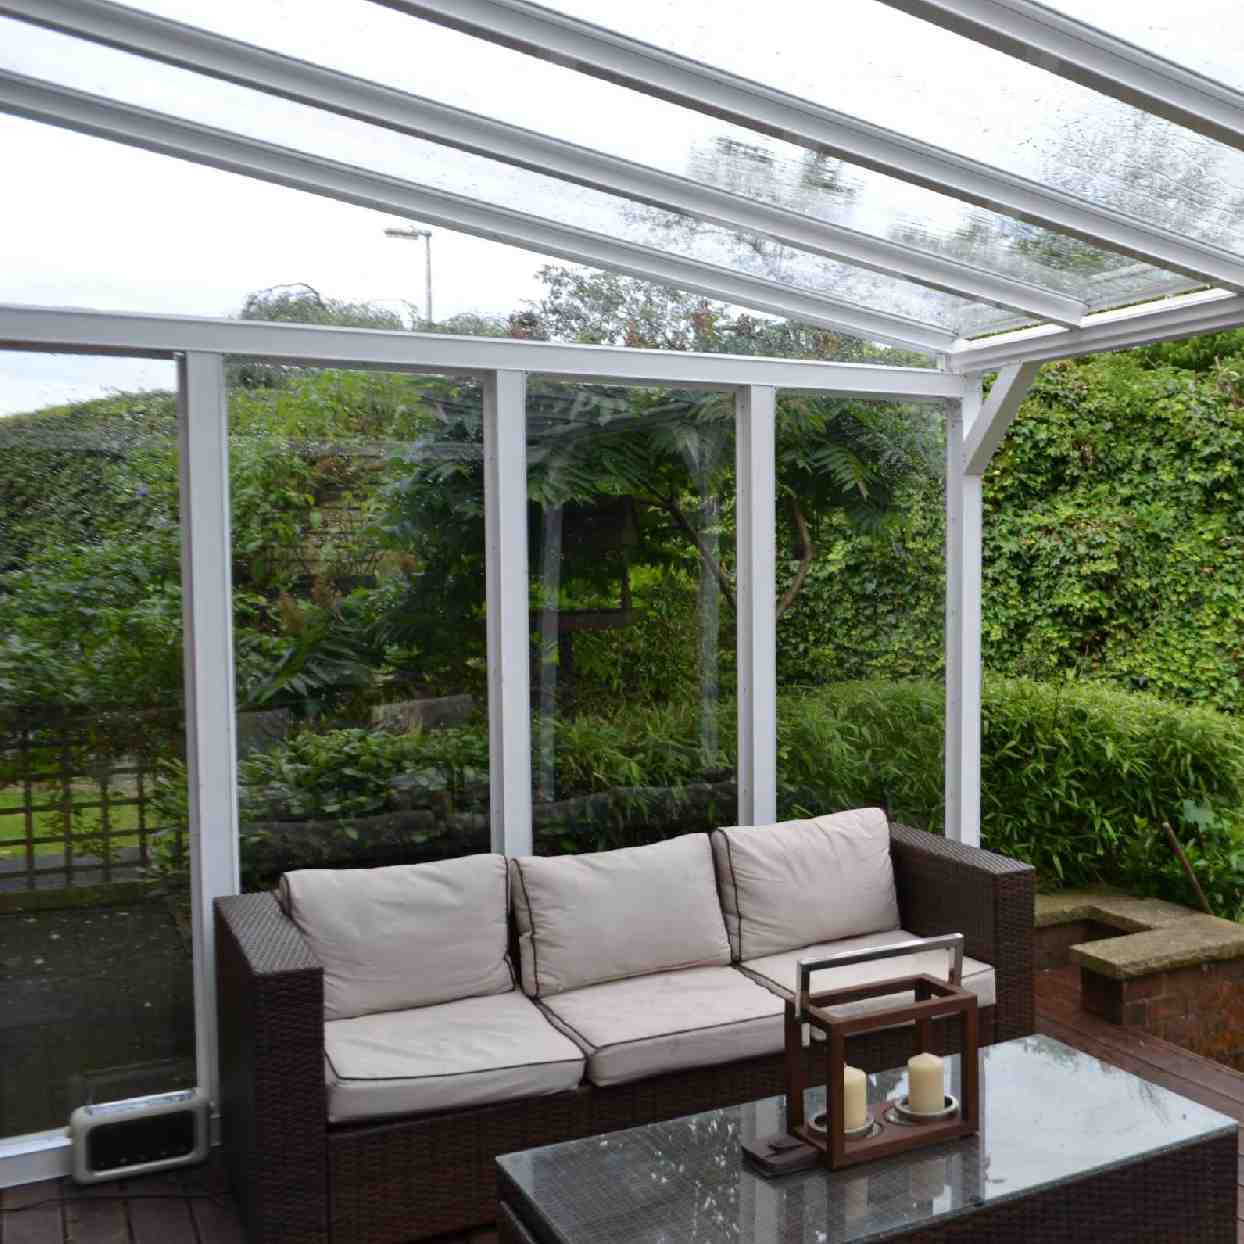 Buy Omega Verandah White with 16mm Polycarbonate Glazing - 12.0m (W) x 3.5m (P), (5) Supporting Posts online today